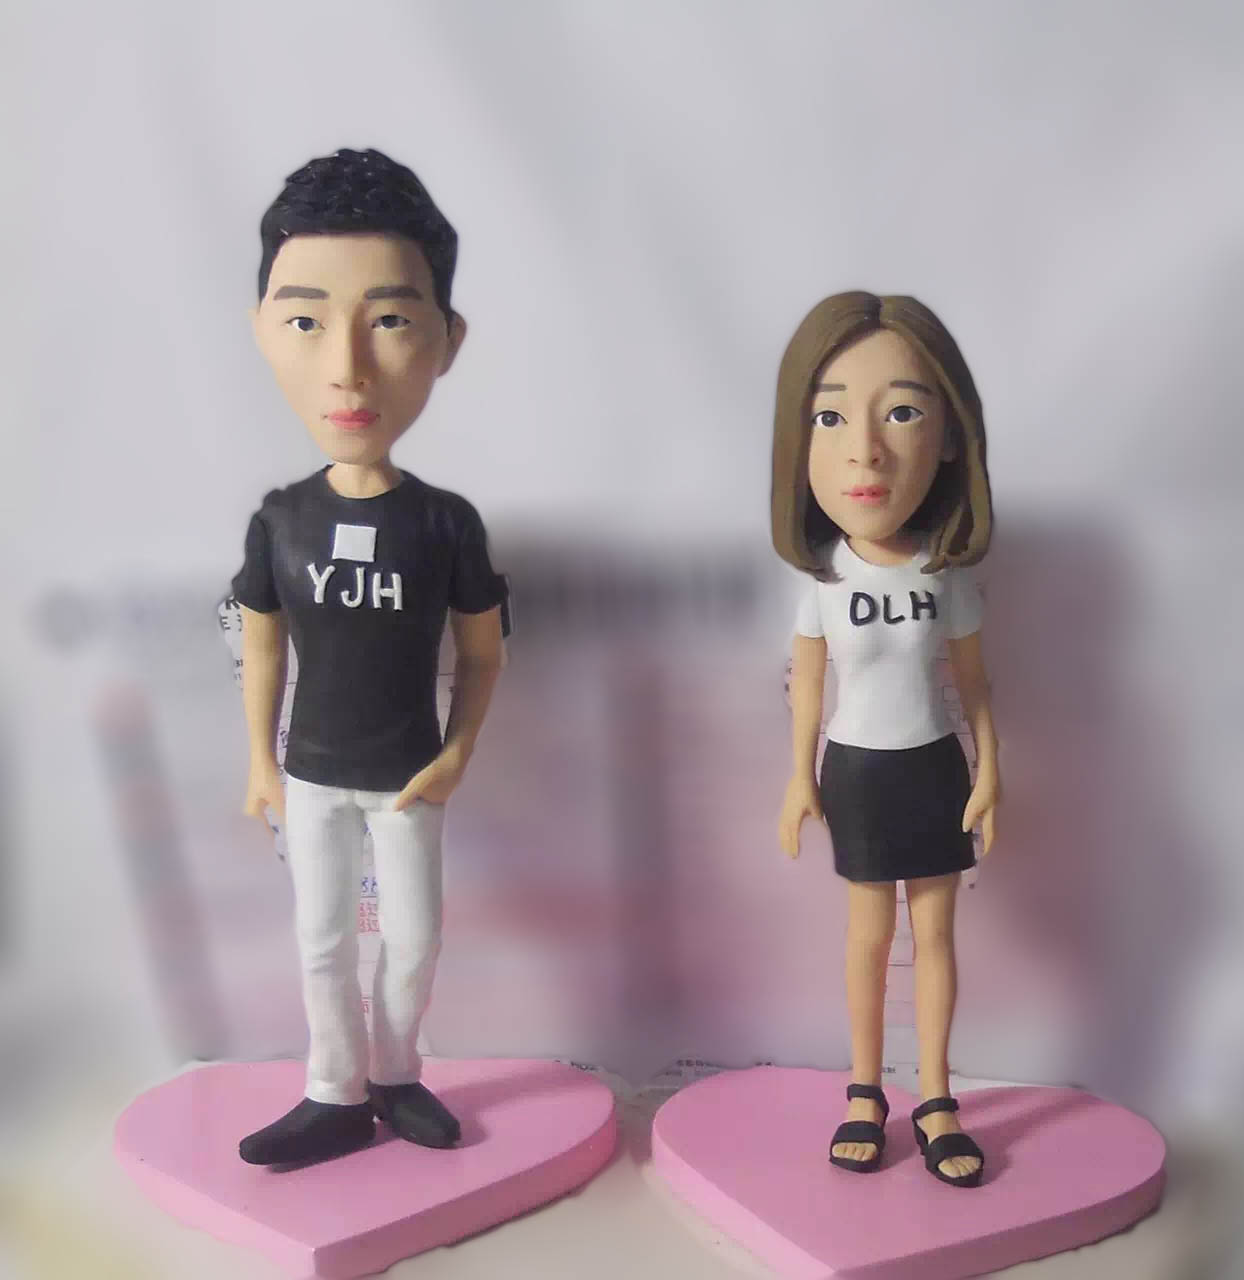 With April Fools Day fast approaching, it can be tempting to pull off regular pranks like so many other people. Another way to celebrate the holiday is by purchasing some unique and custom-made Bobblehead figures for someone! 